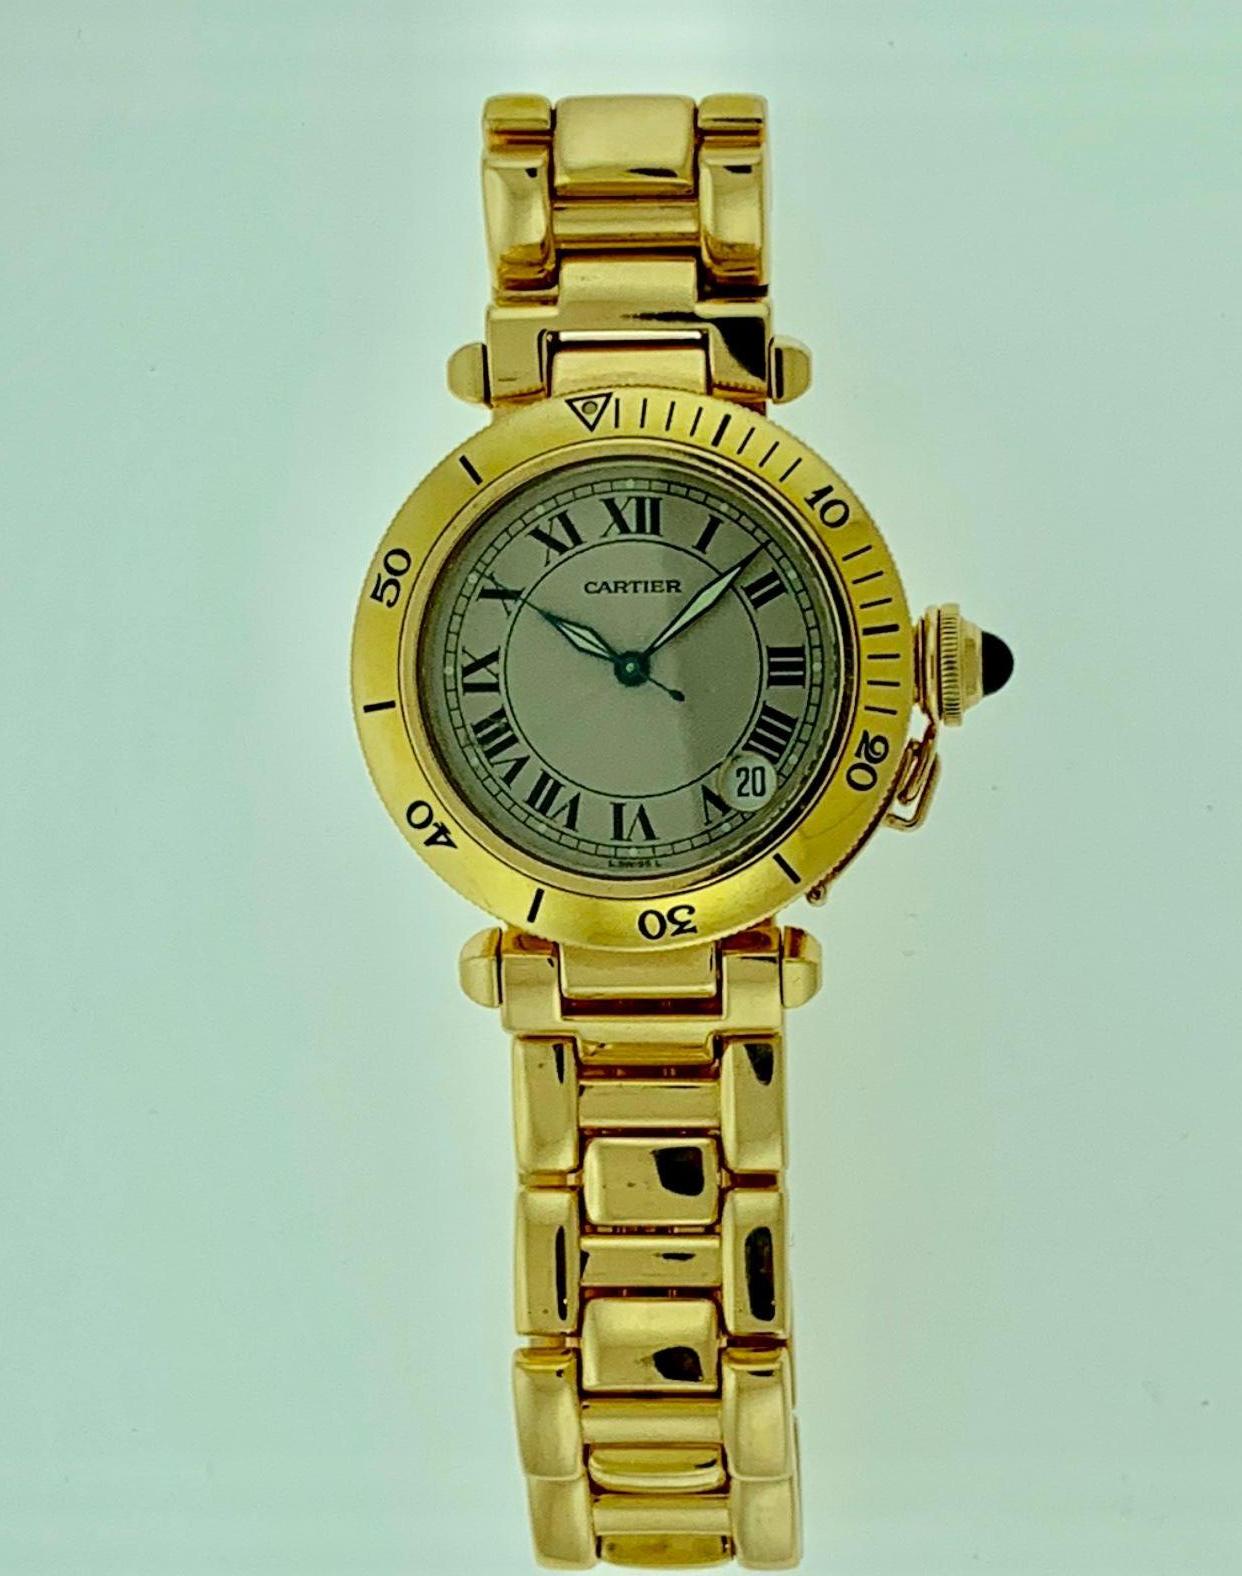 150 Gm 18 Karat Solid Yellow Gold Cartier Pasha Automatic Watch Water Resistant 3